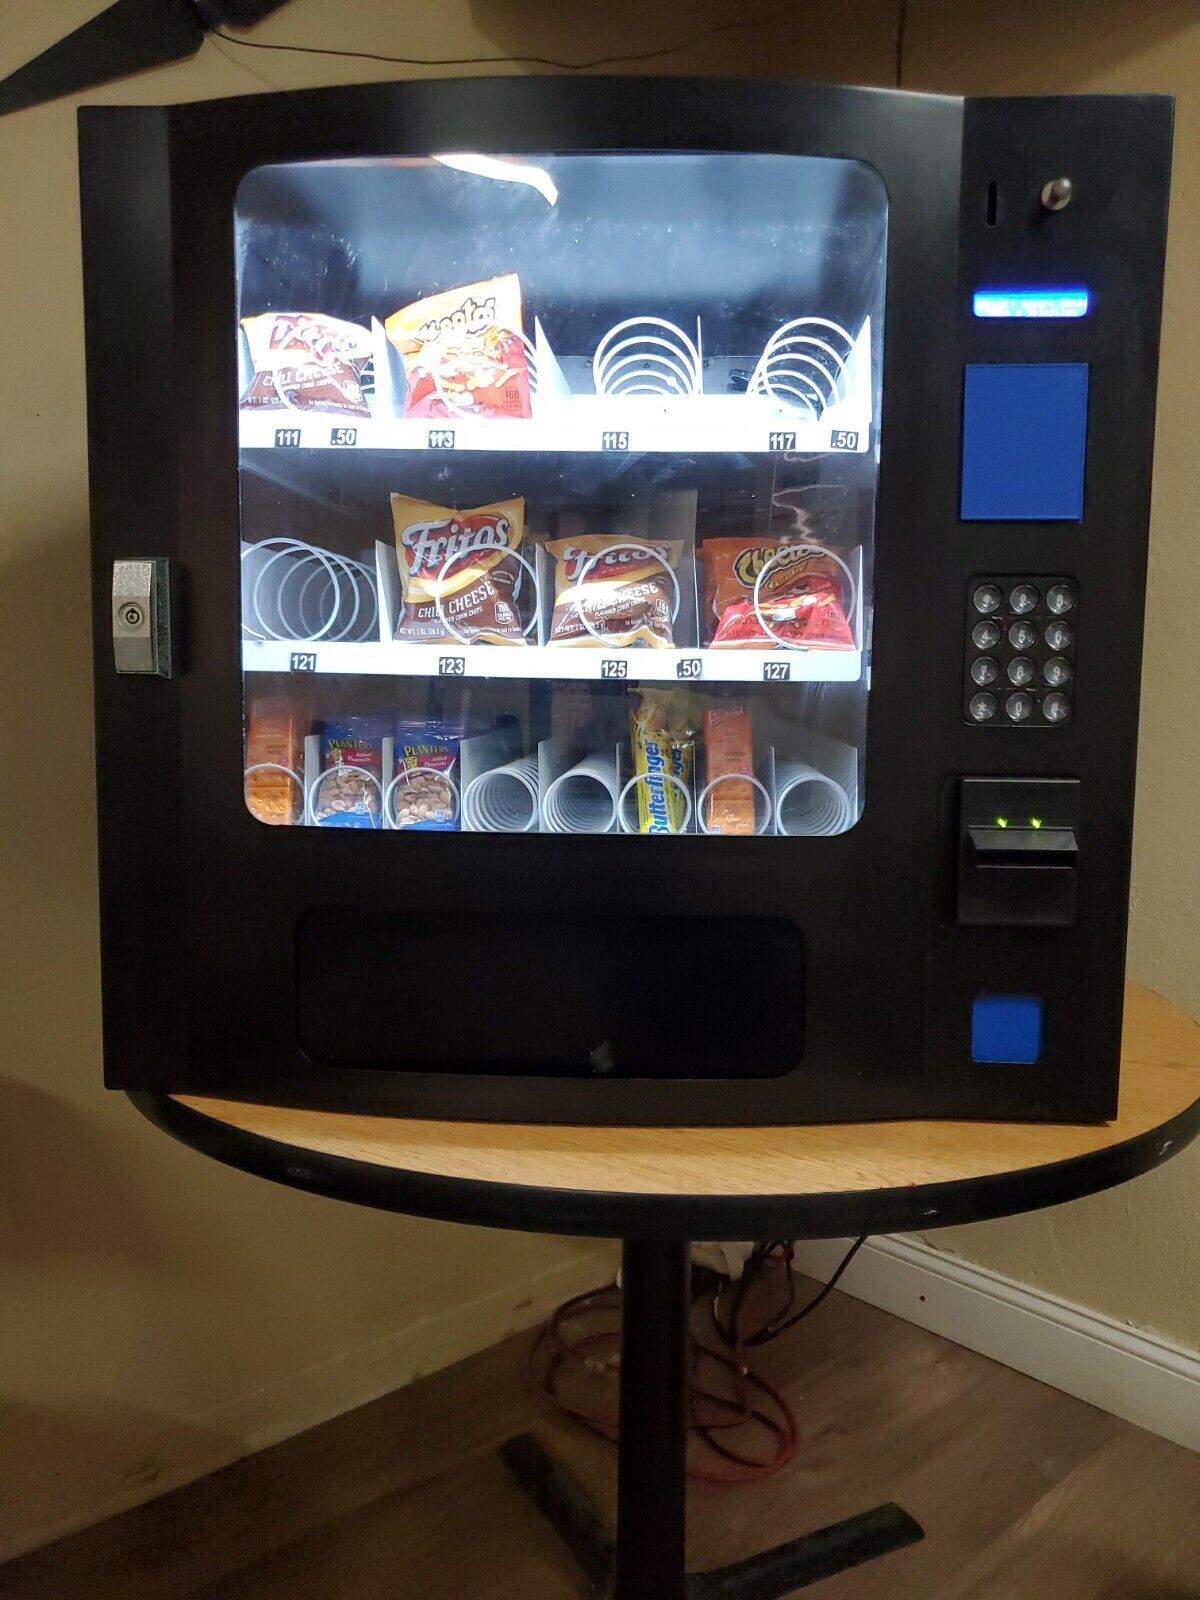 Used snack vending machines for sale